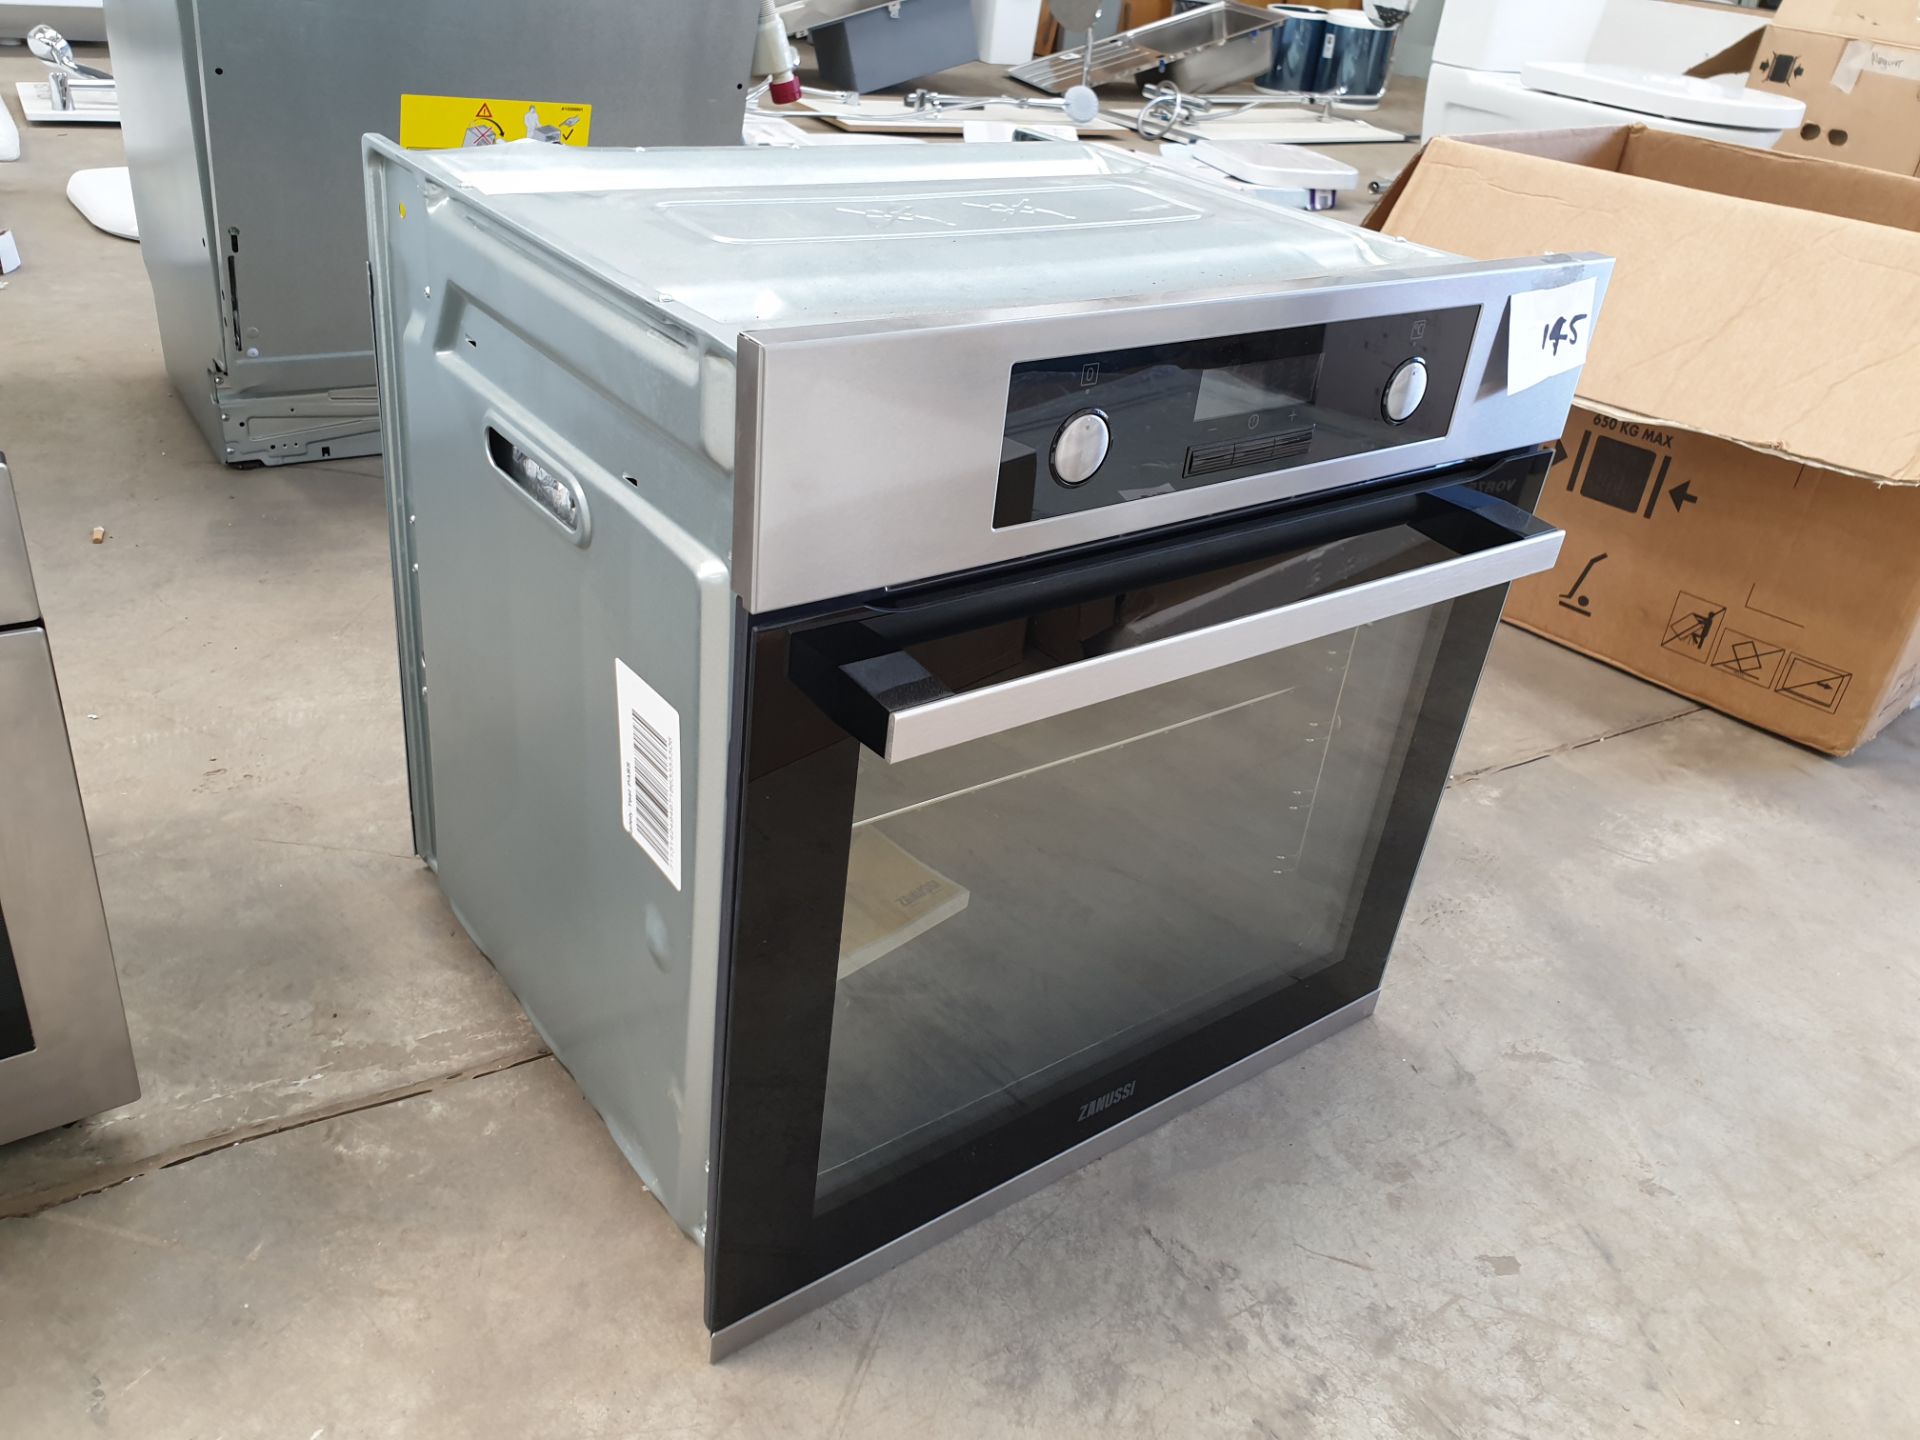 Zanussi Electric Oven 550 x 570 x 570mm - Image 2 of 3